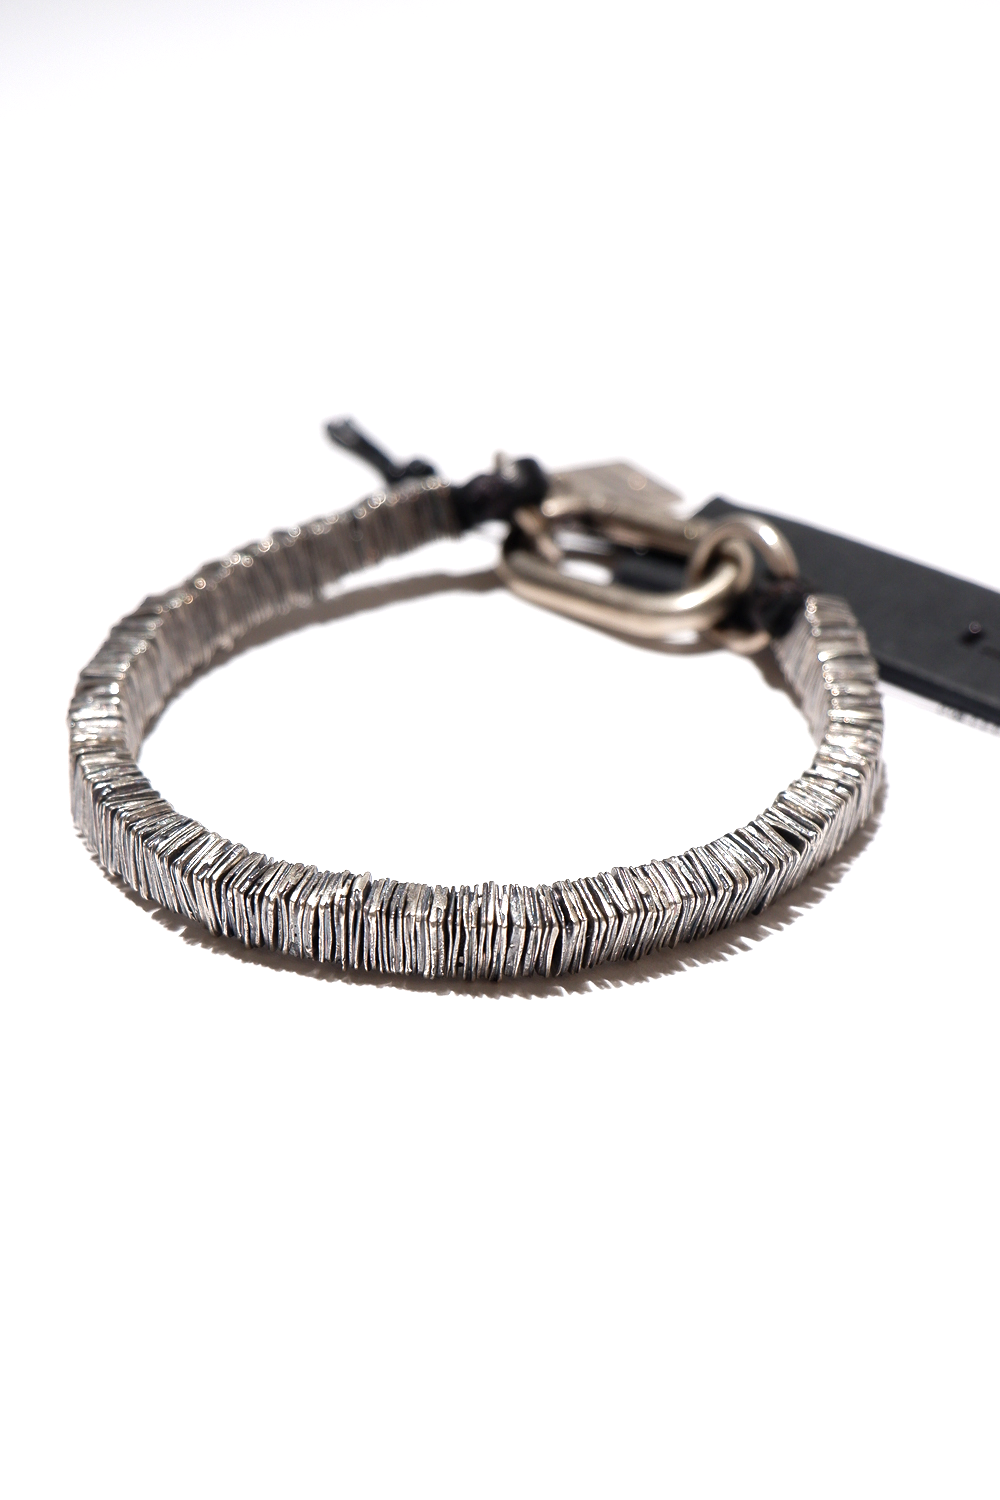 Buy the GOTI Bracelet AG BR1114 in Silver at Intro. Spend £50 for free UK delivery. Official stockists. We ship worldwide.